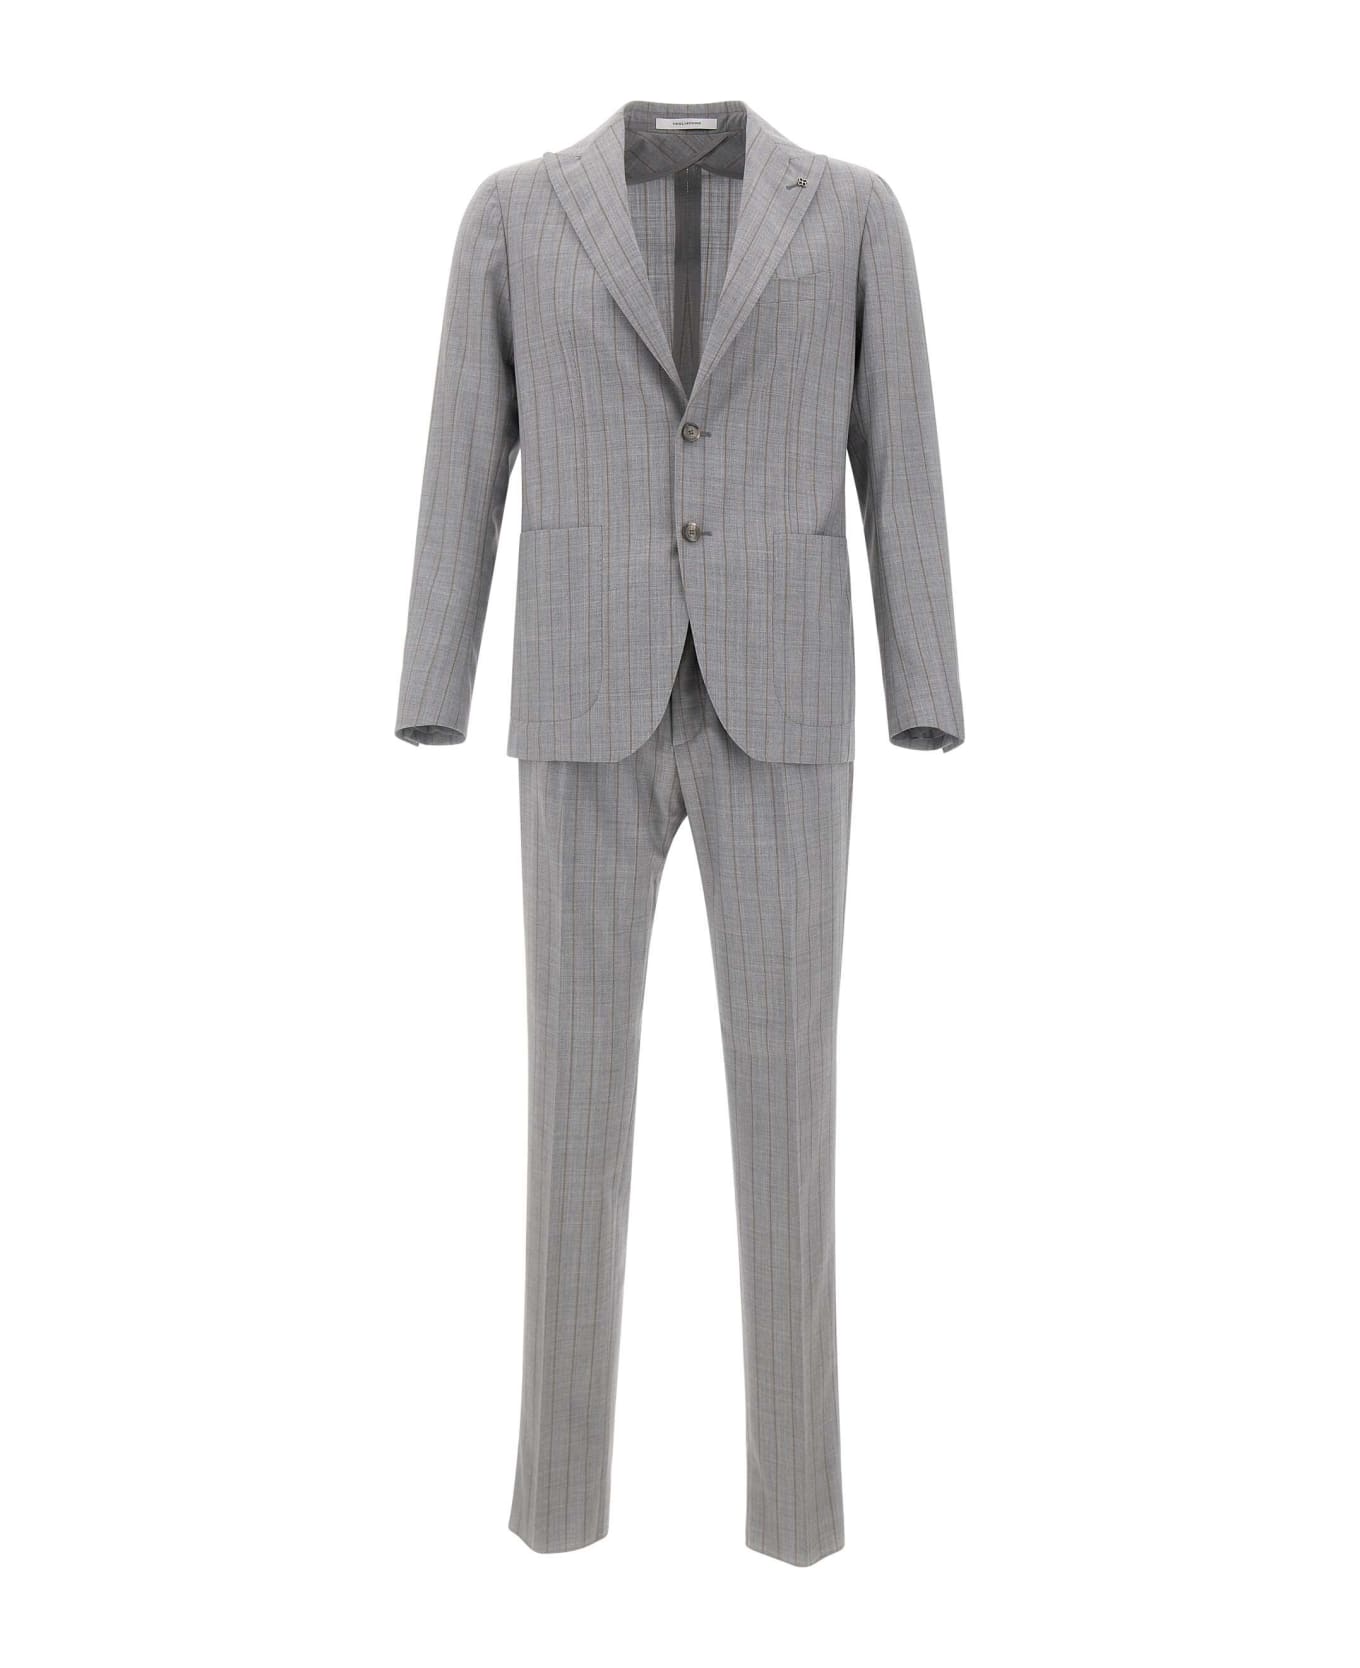 Tagliatore Cool Two-piece Suit - GREY スーツ